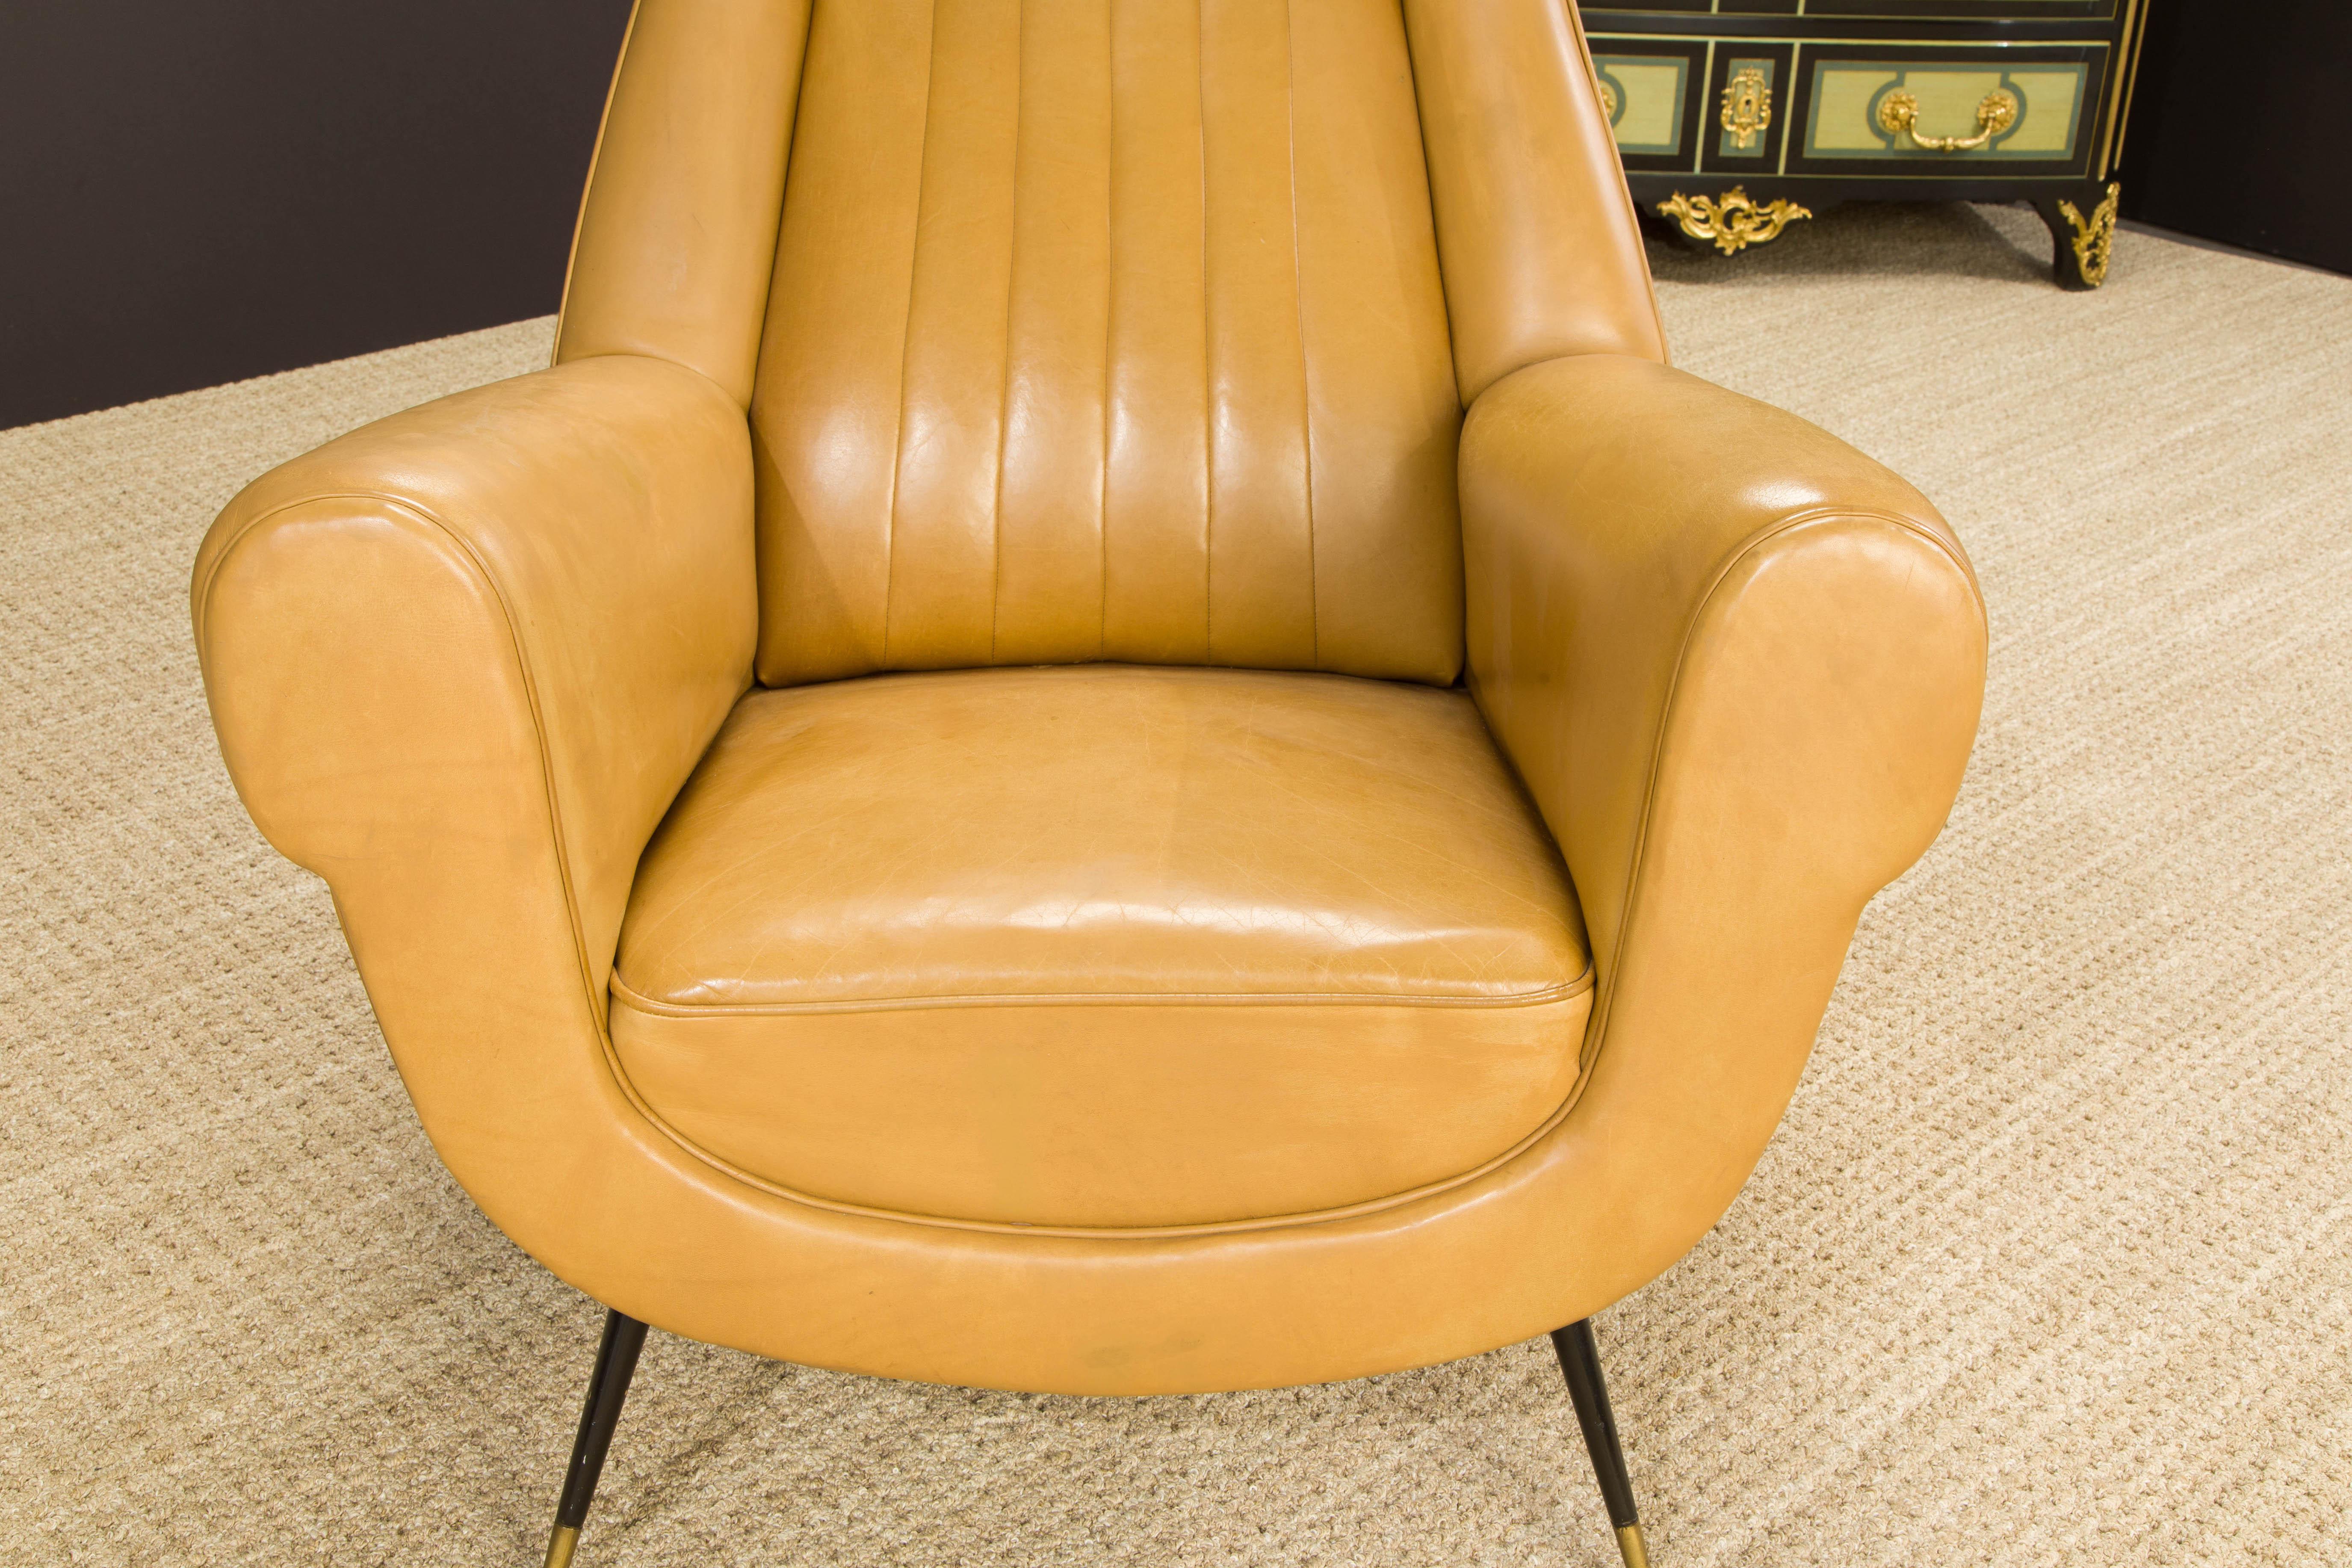 Pair of Gigi Radice for Minotti Leather Wingback Lounge Chairs, Italy, c. 1950s 8